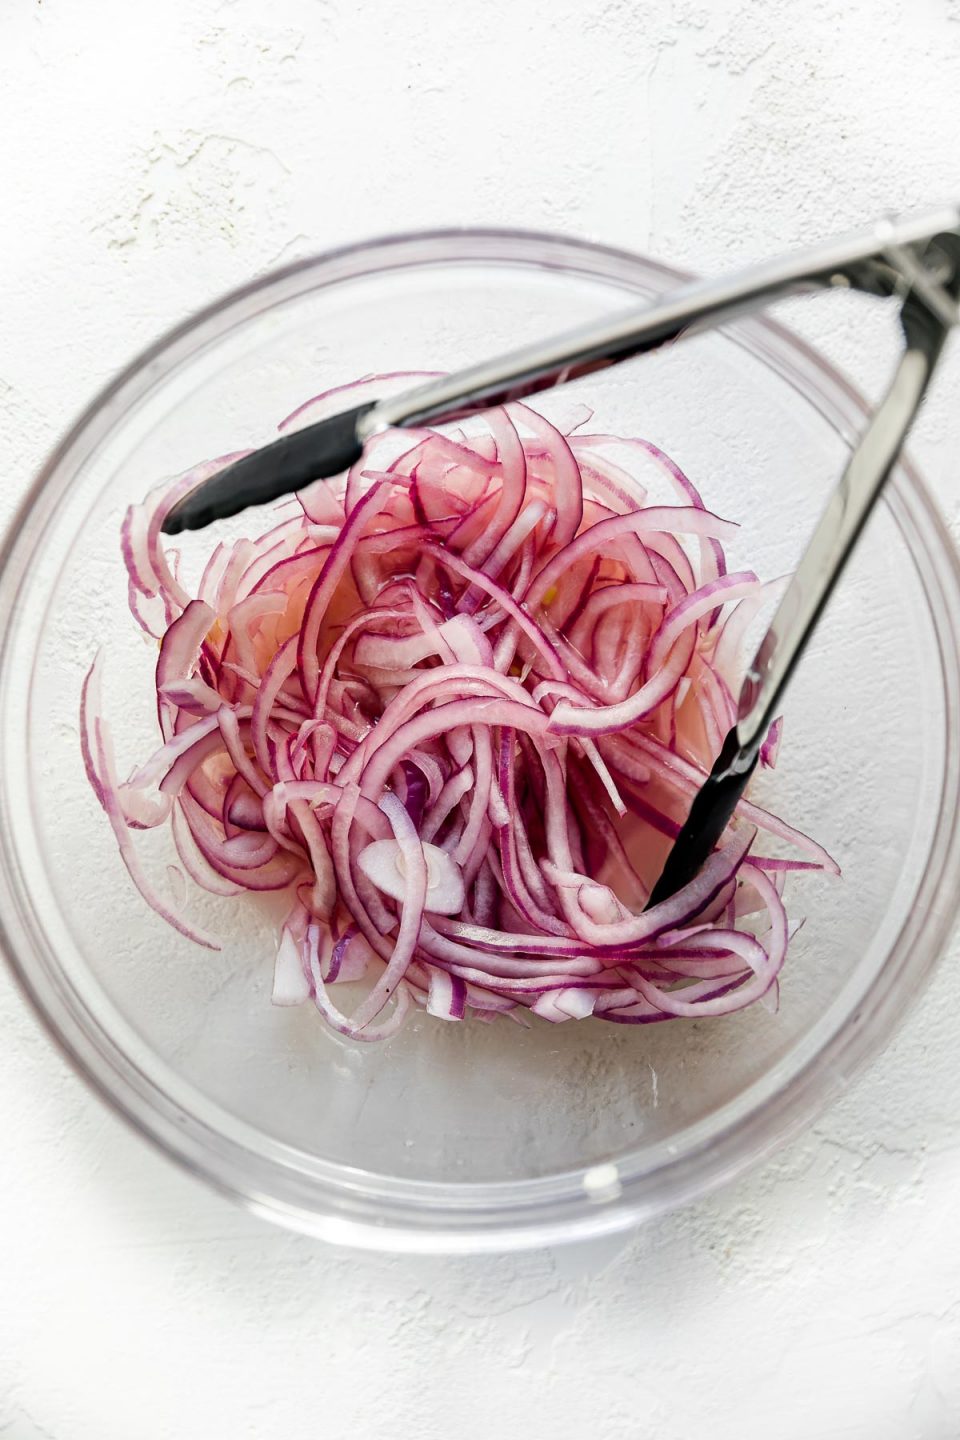 Thinly sliced red onion in a clear glass bowl soaking in lime juice. There is a small pair of tongs in the bowl with the onions, which sits atop a textured white surface.